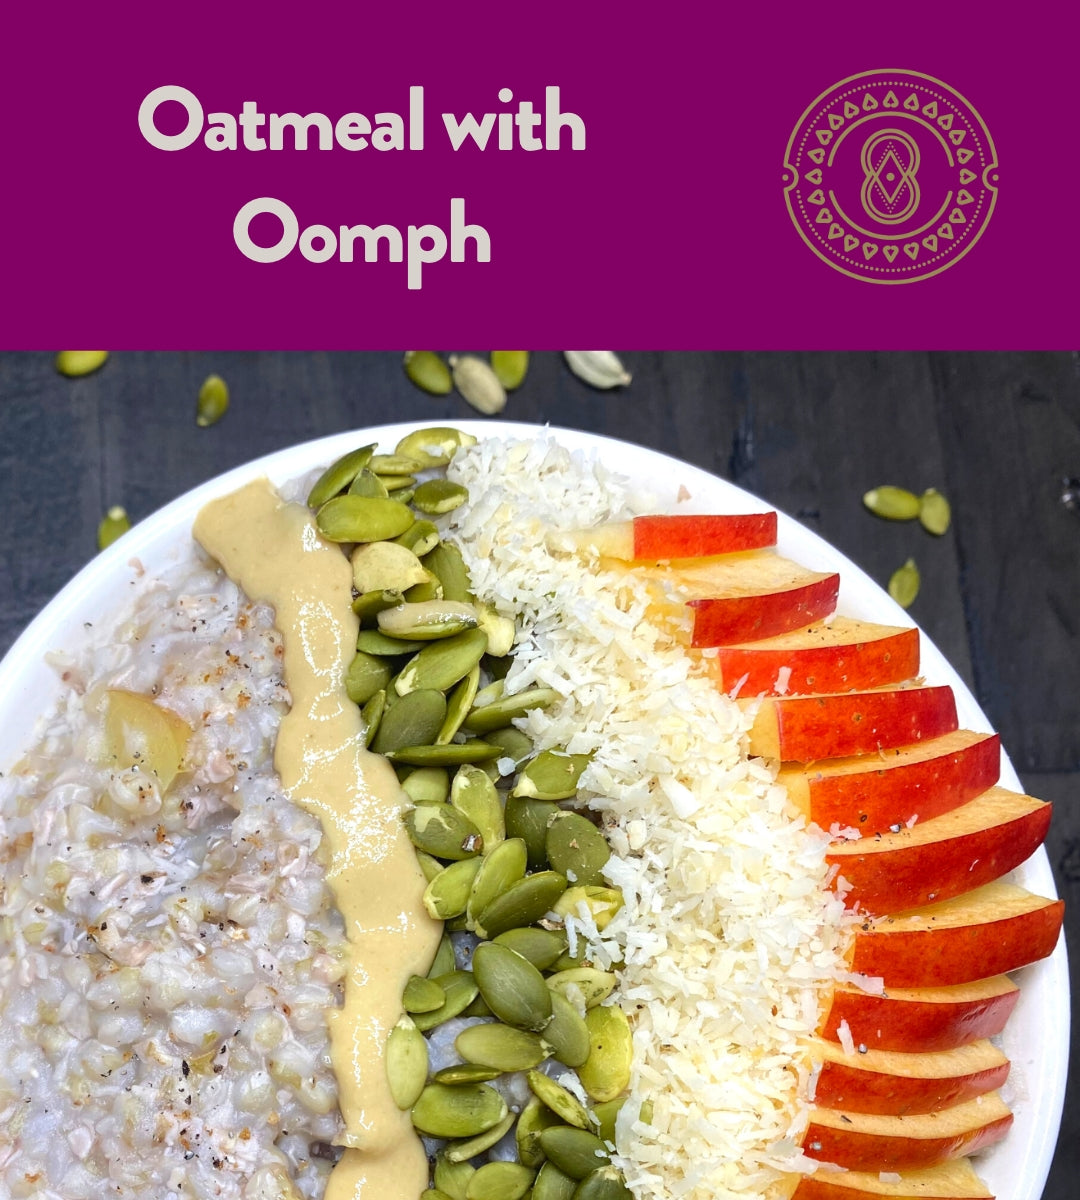 RECIPE: Oatmeal with Oomph